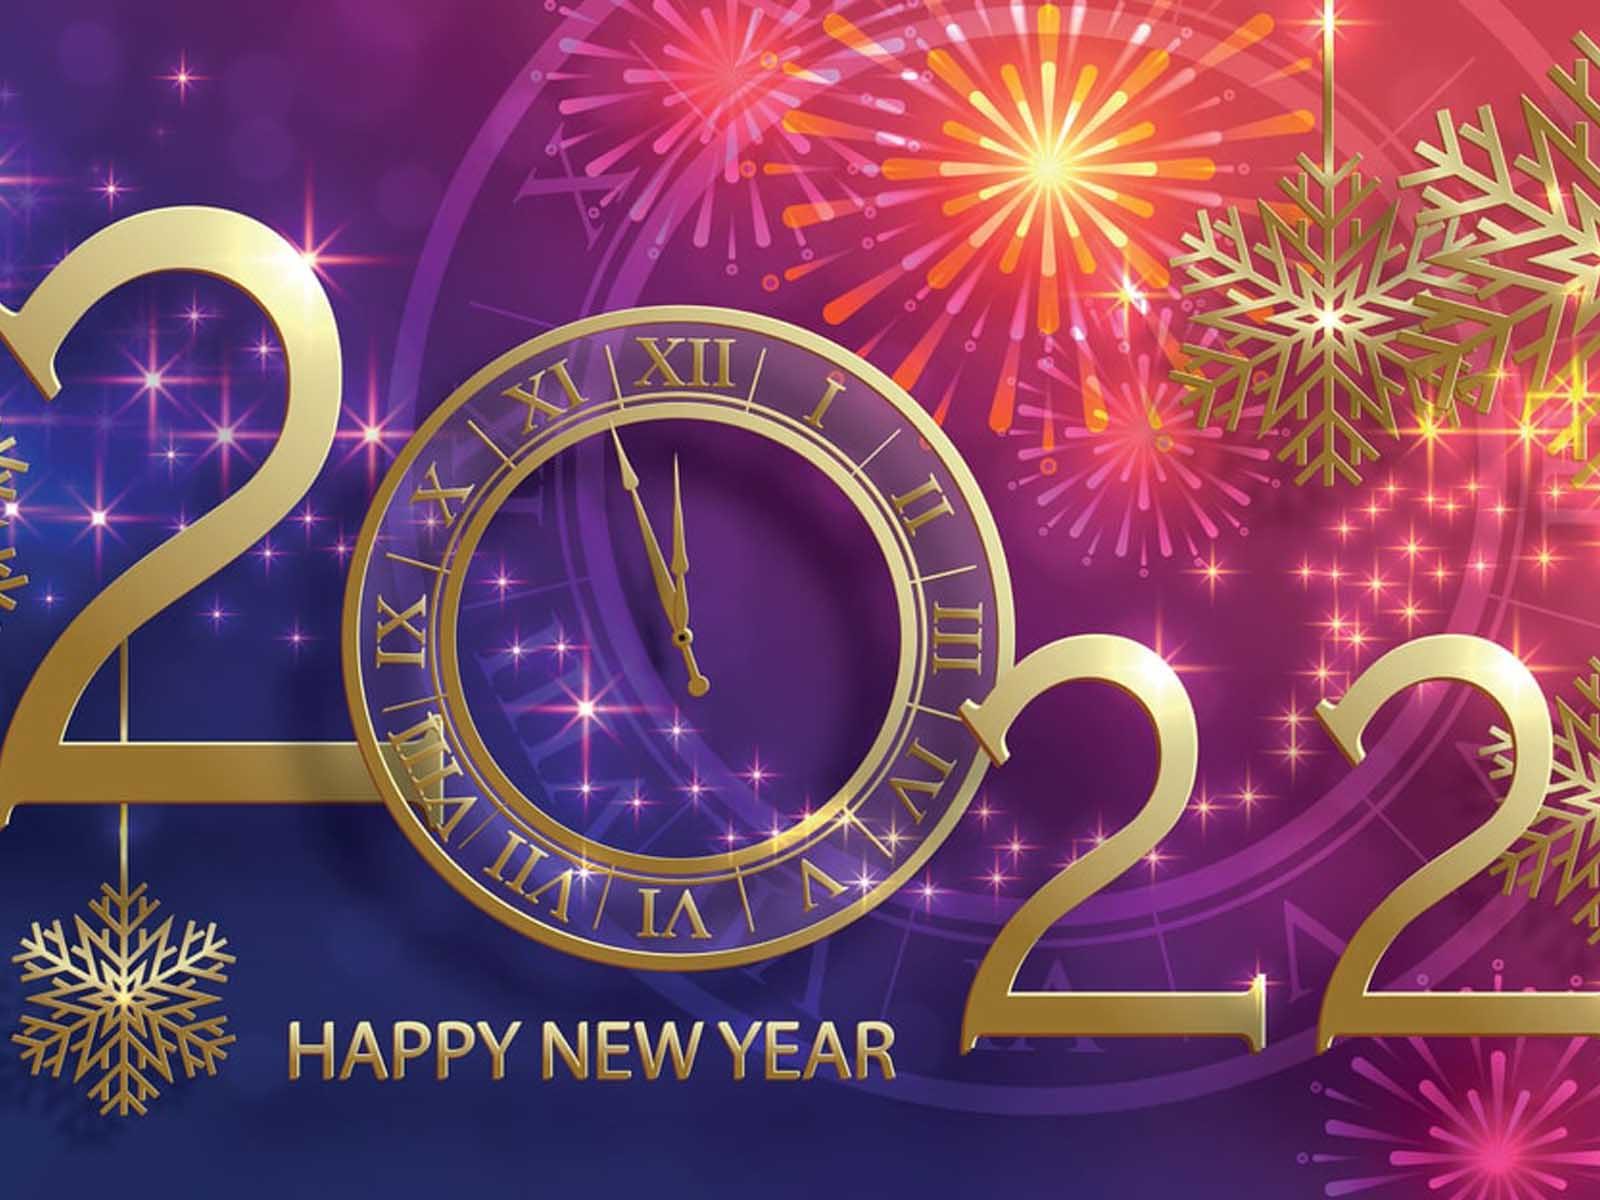 Greeting Cards Wishes Image Happy New Year Wallpaper13